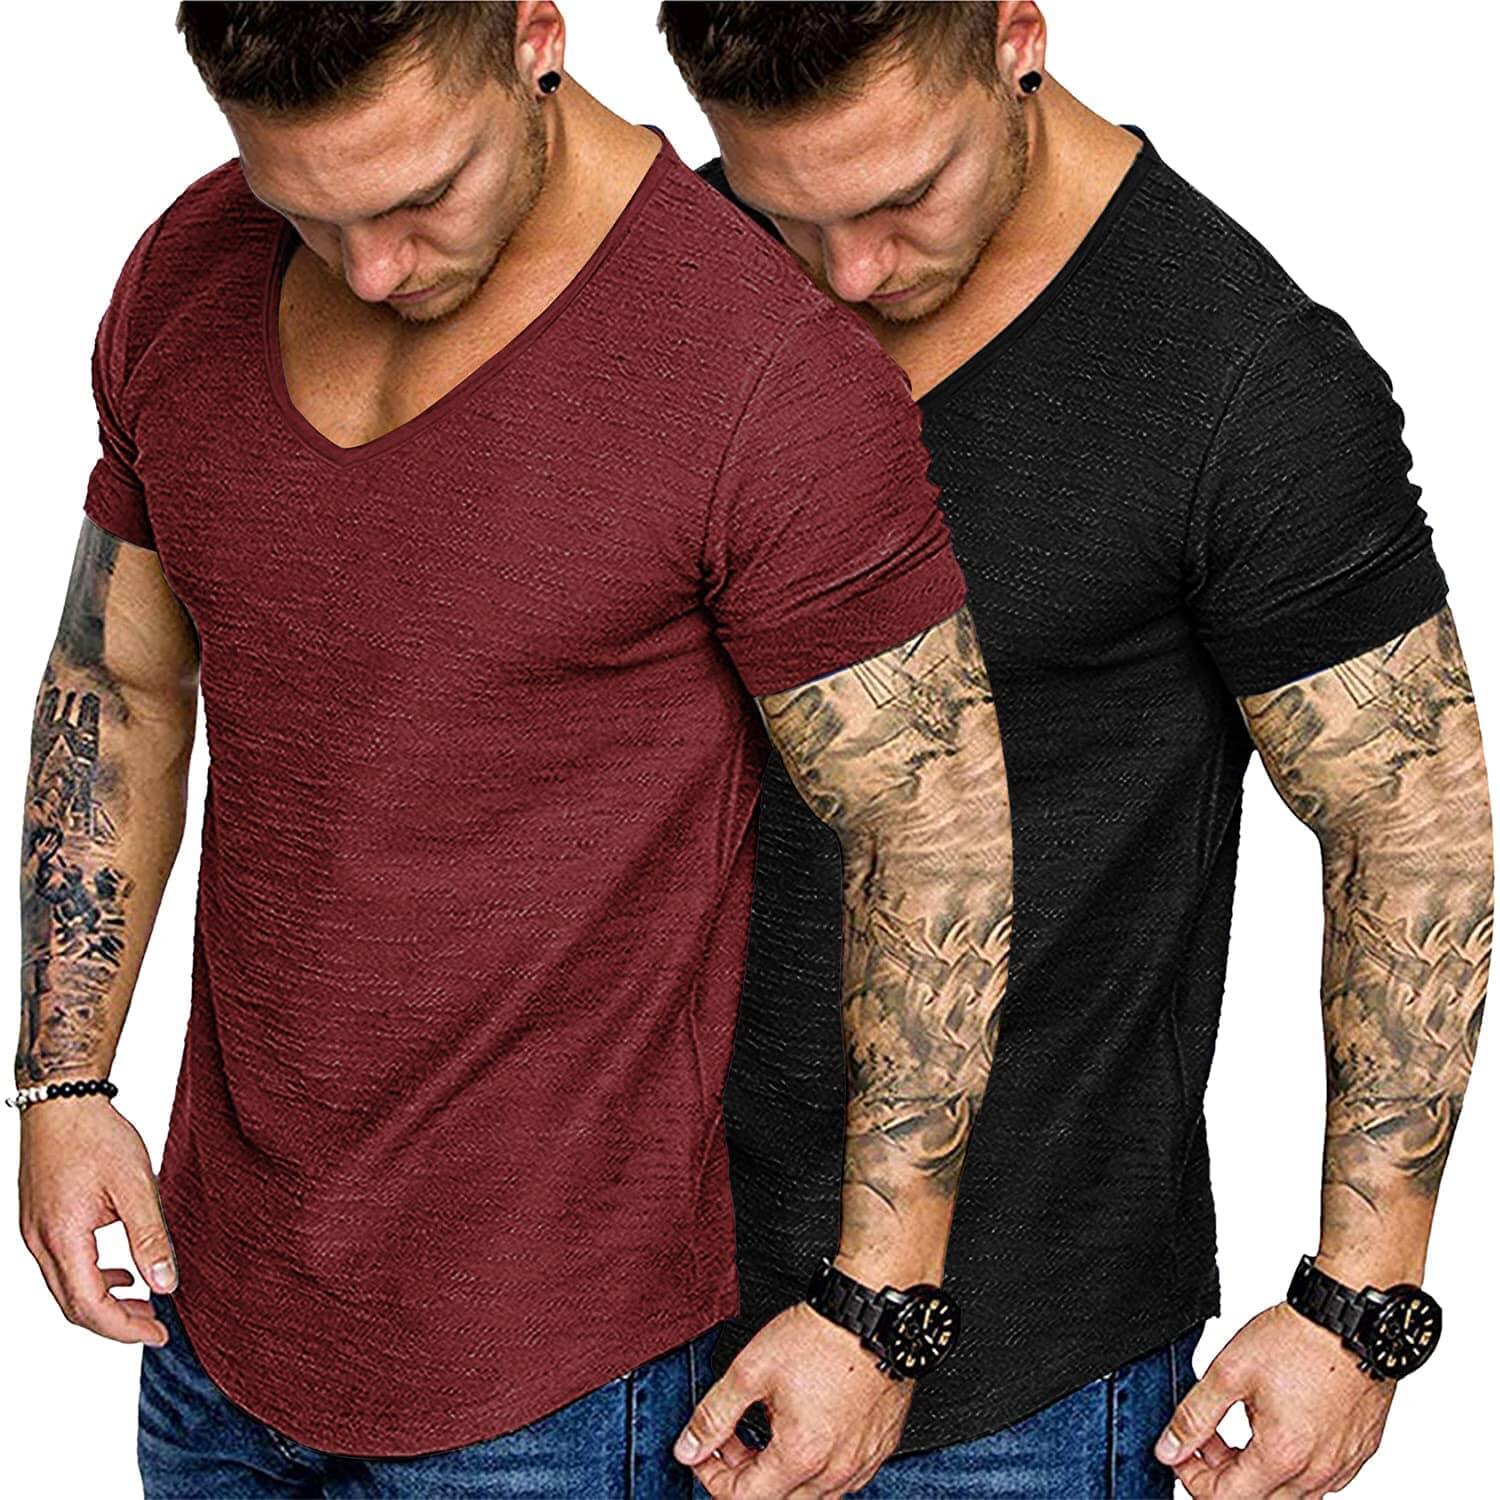 Coofandy Men's 2 Pack Muscle T-Shirt - Free US Delivery – COOFANDY